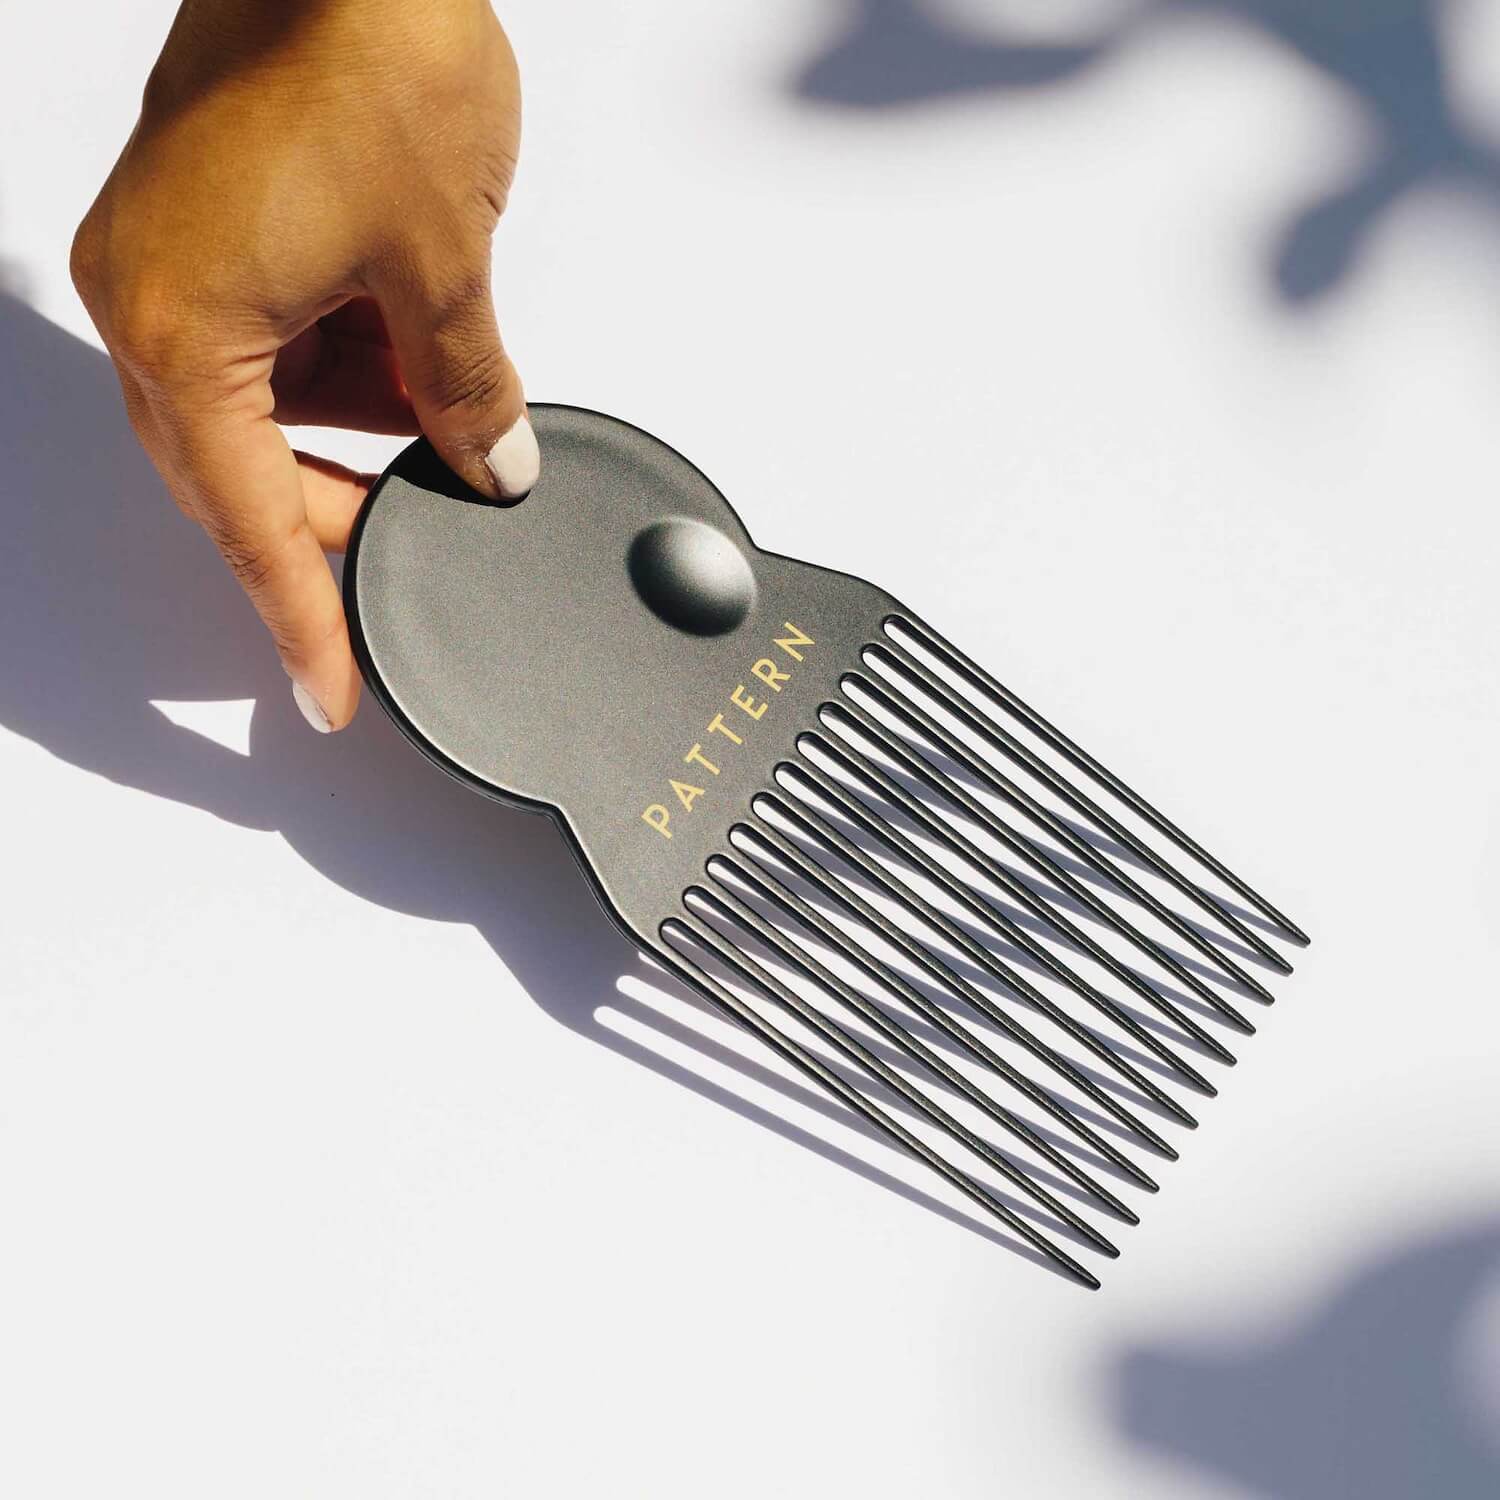 Comb for men's curly hair